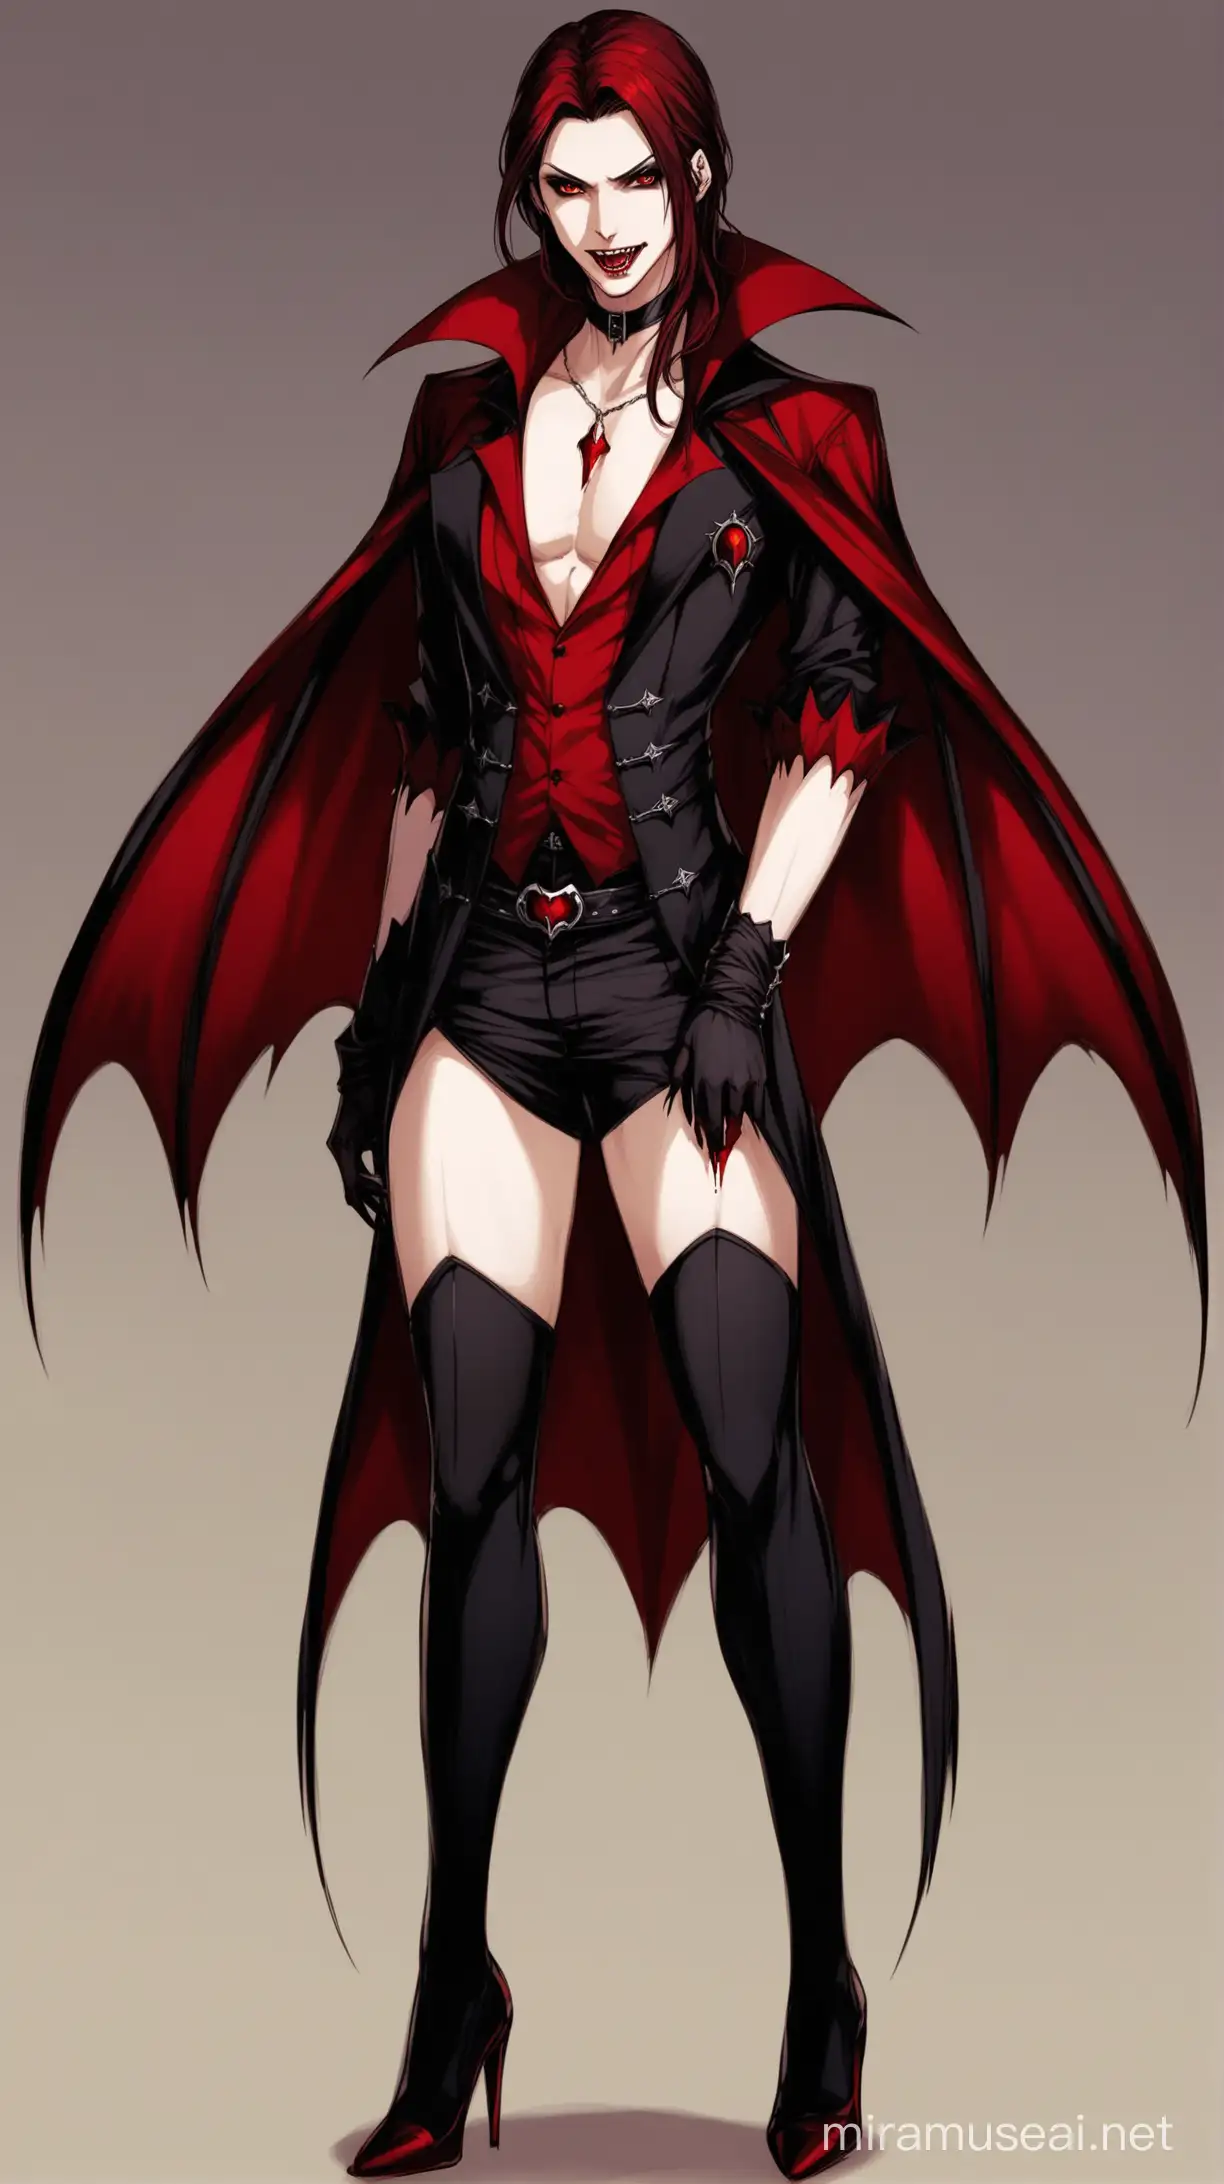 Outfit Deging    snake image with vampire
In male or female
3 image 
